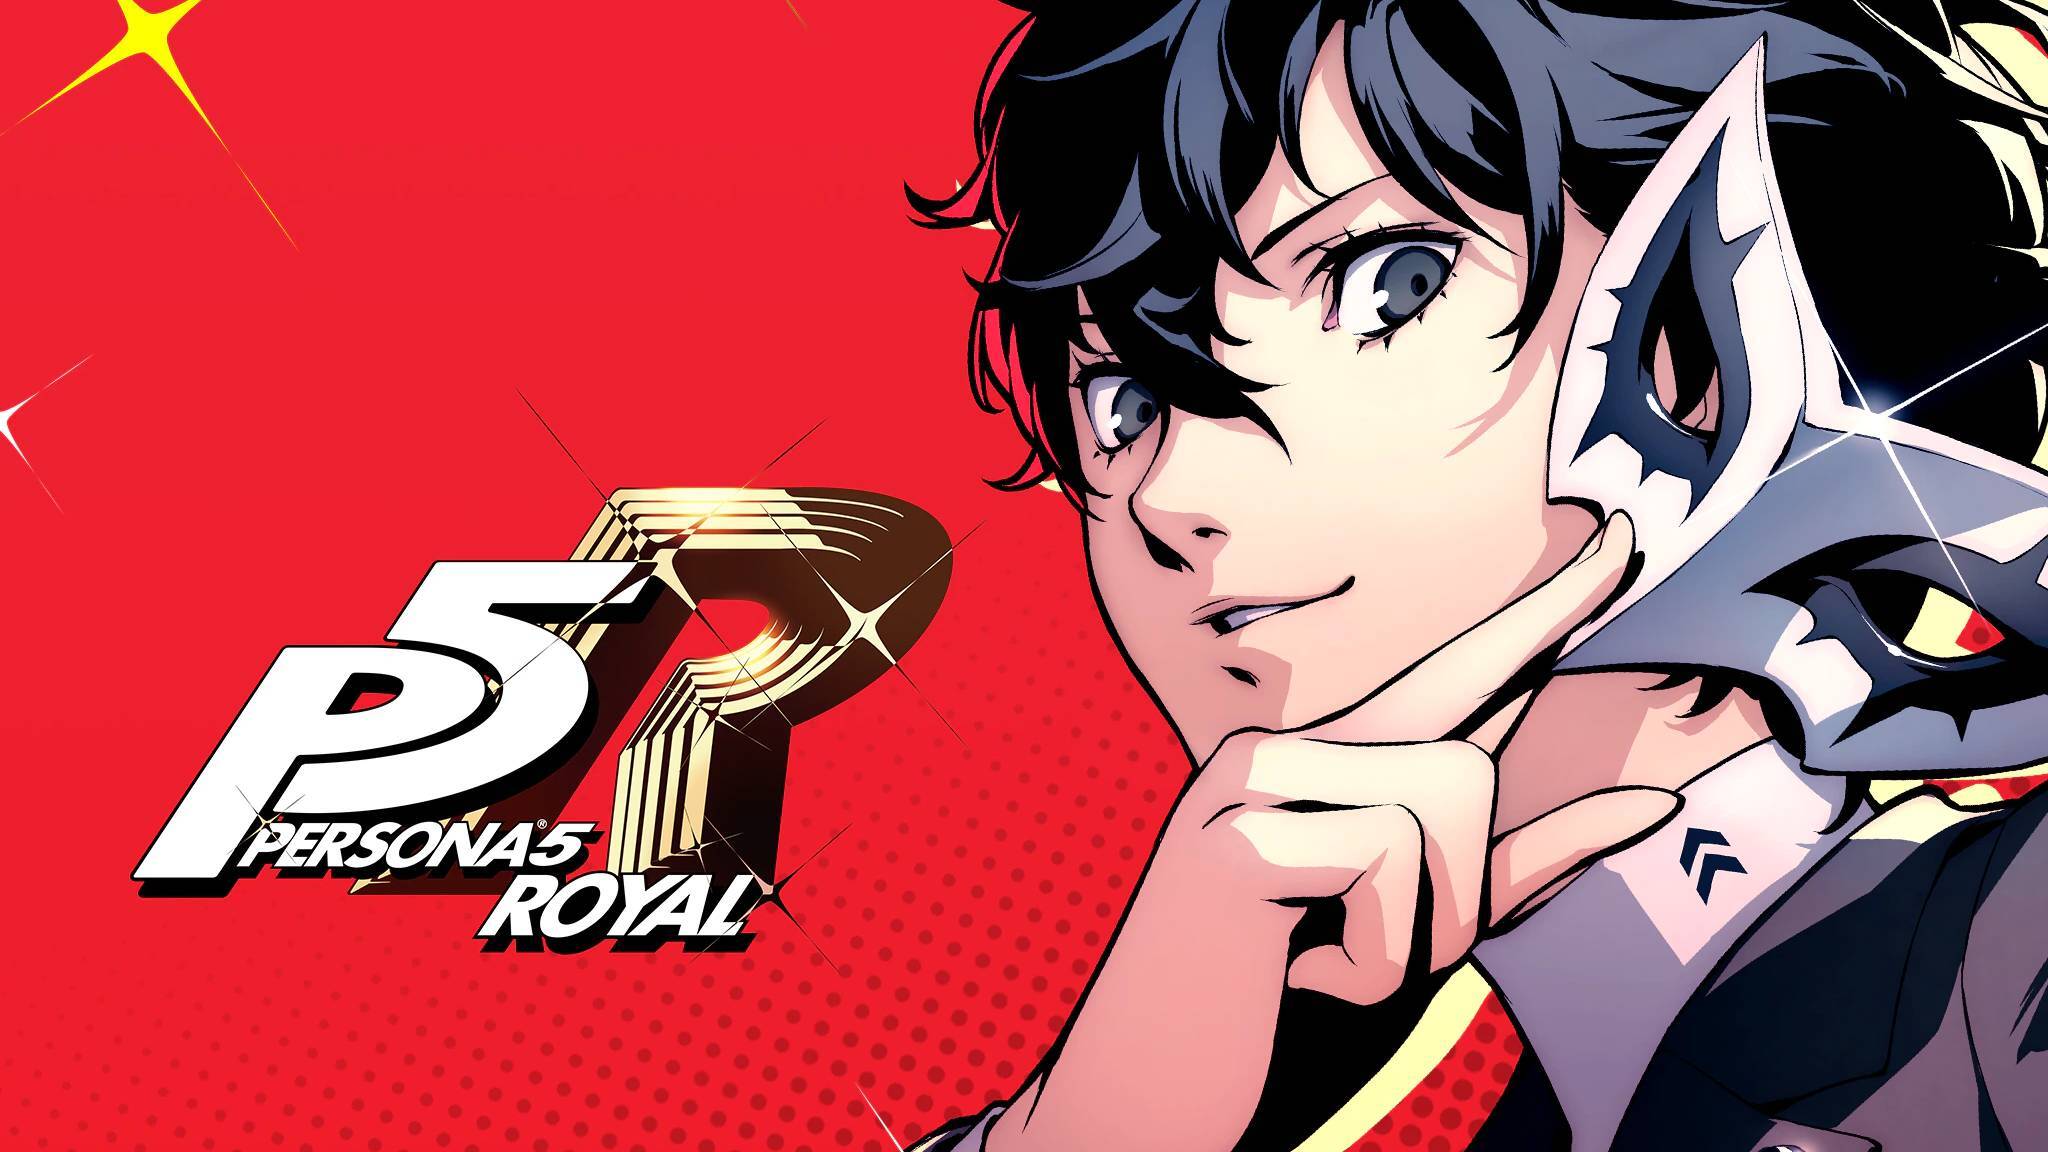 Persona 5 Royal, Persona 4 Golden, and Persona 3 Portable are coming to  Xbox Game Pass